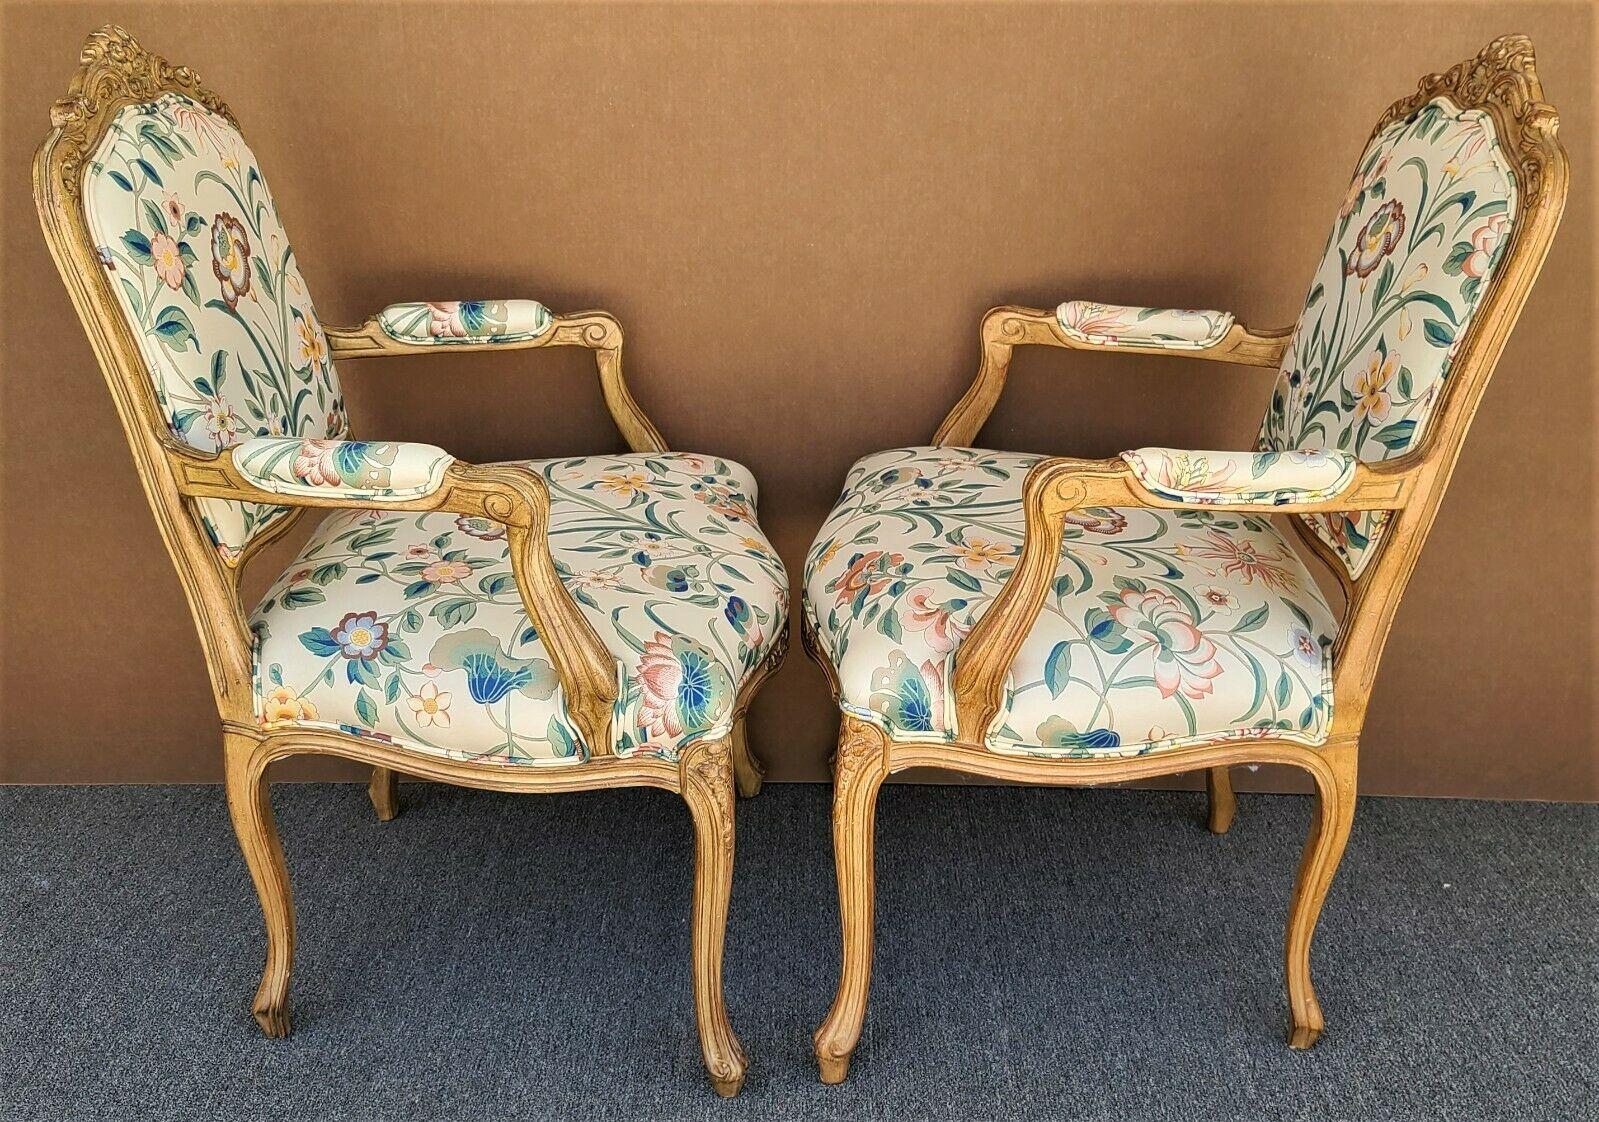 French Provincial Louis XV Armchairs by Chateau d'Ax, Set of 2 For Sale 1